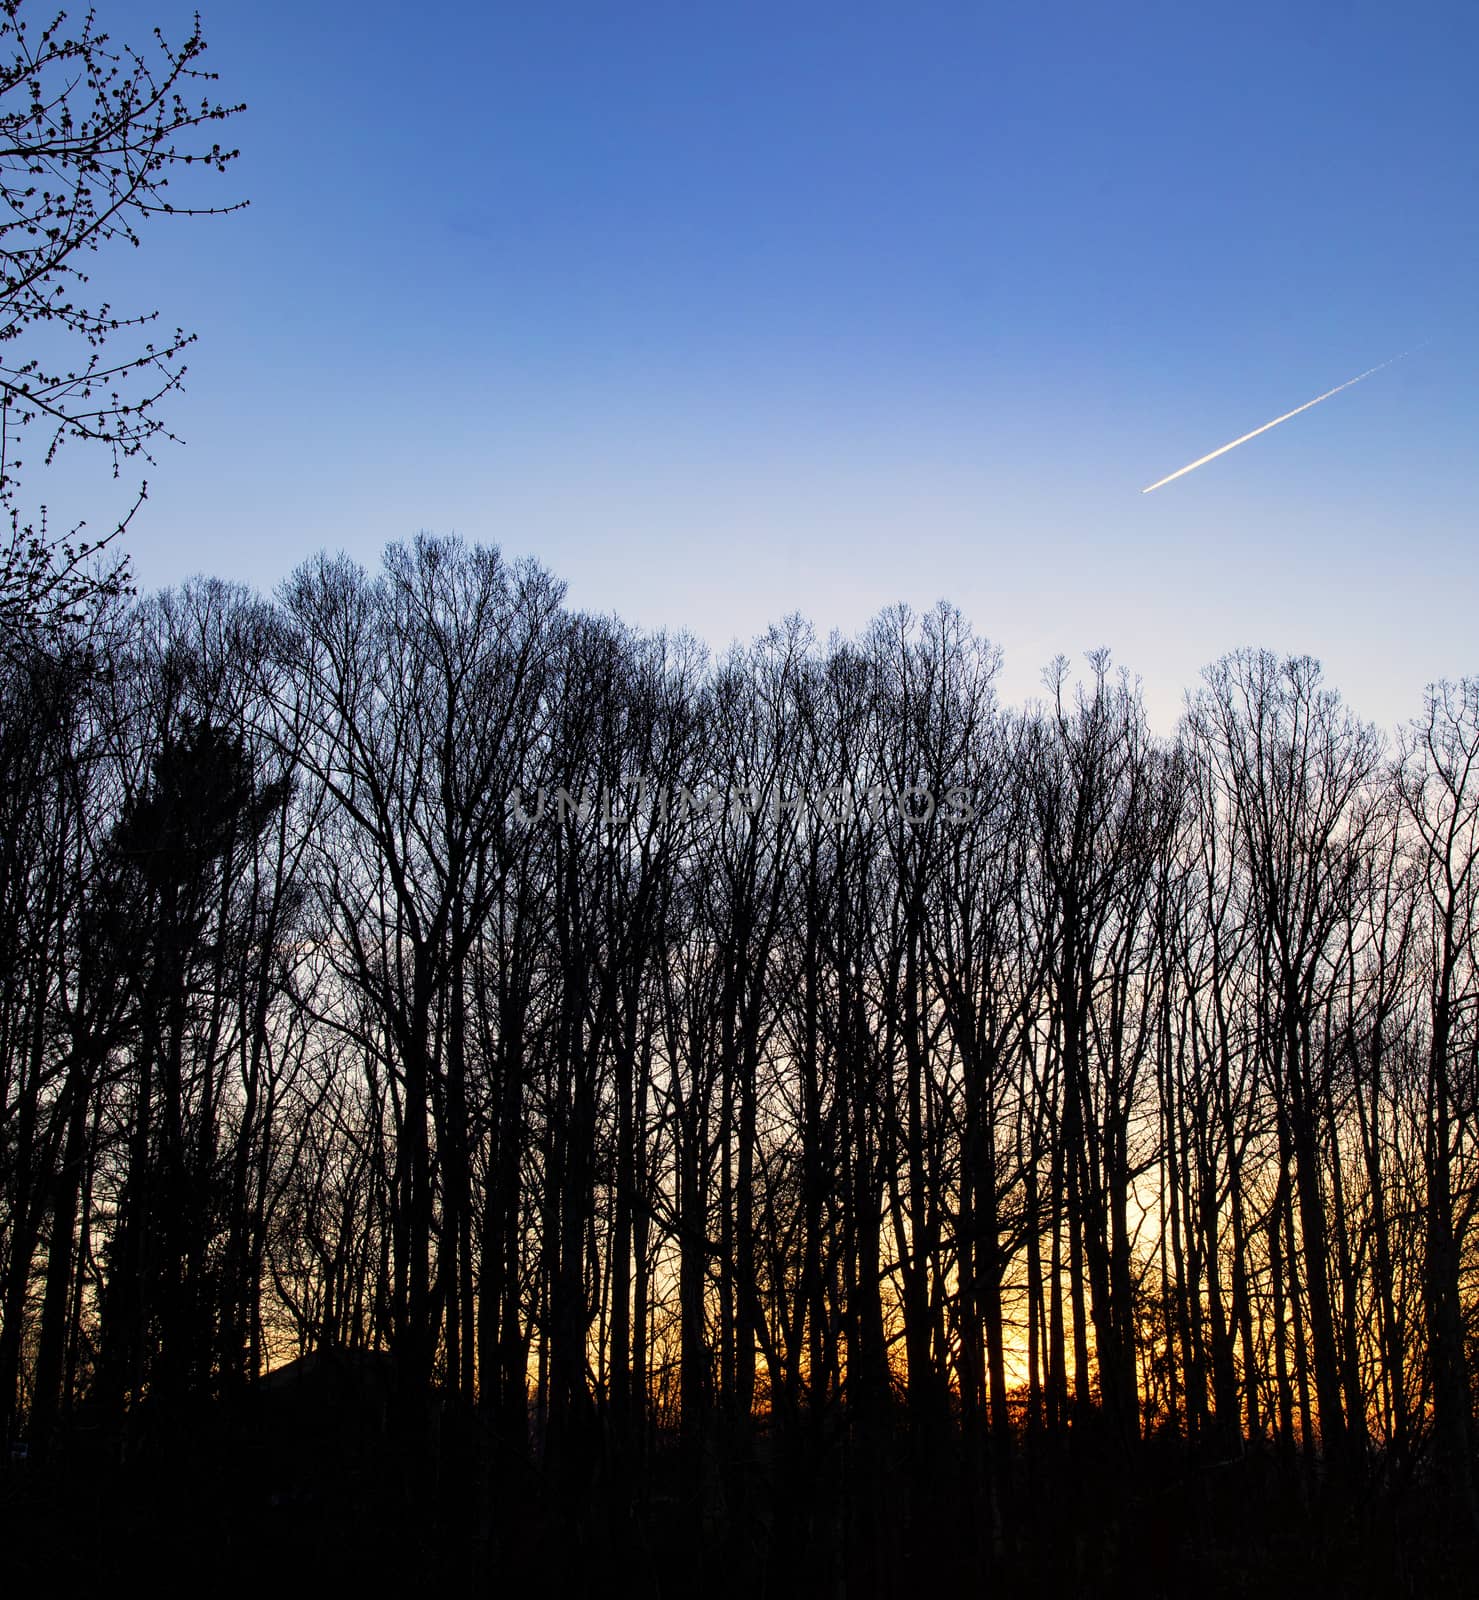 Jet airplane leaves a contrail as it flies into the sunset over a grove of hardwood trees.